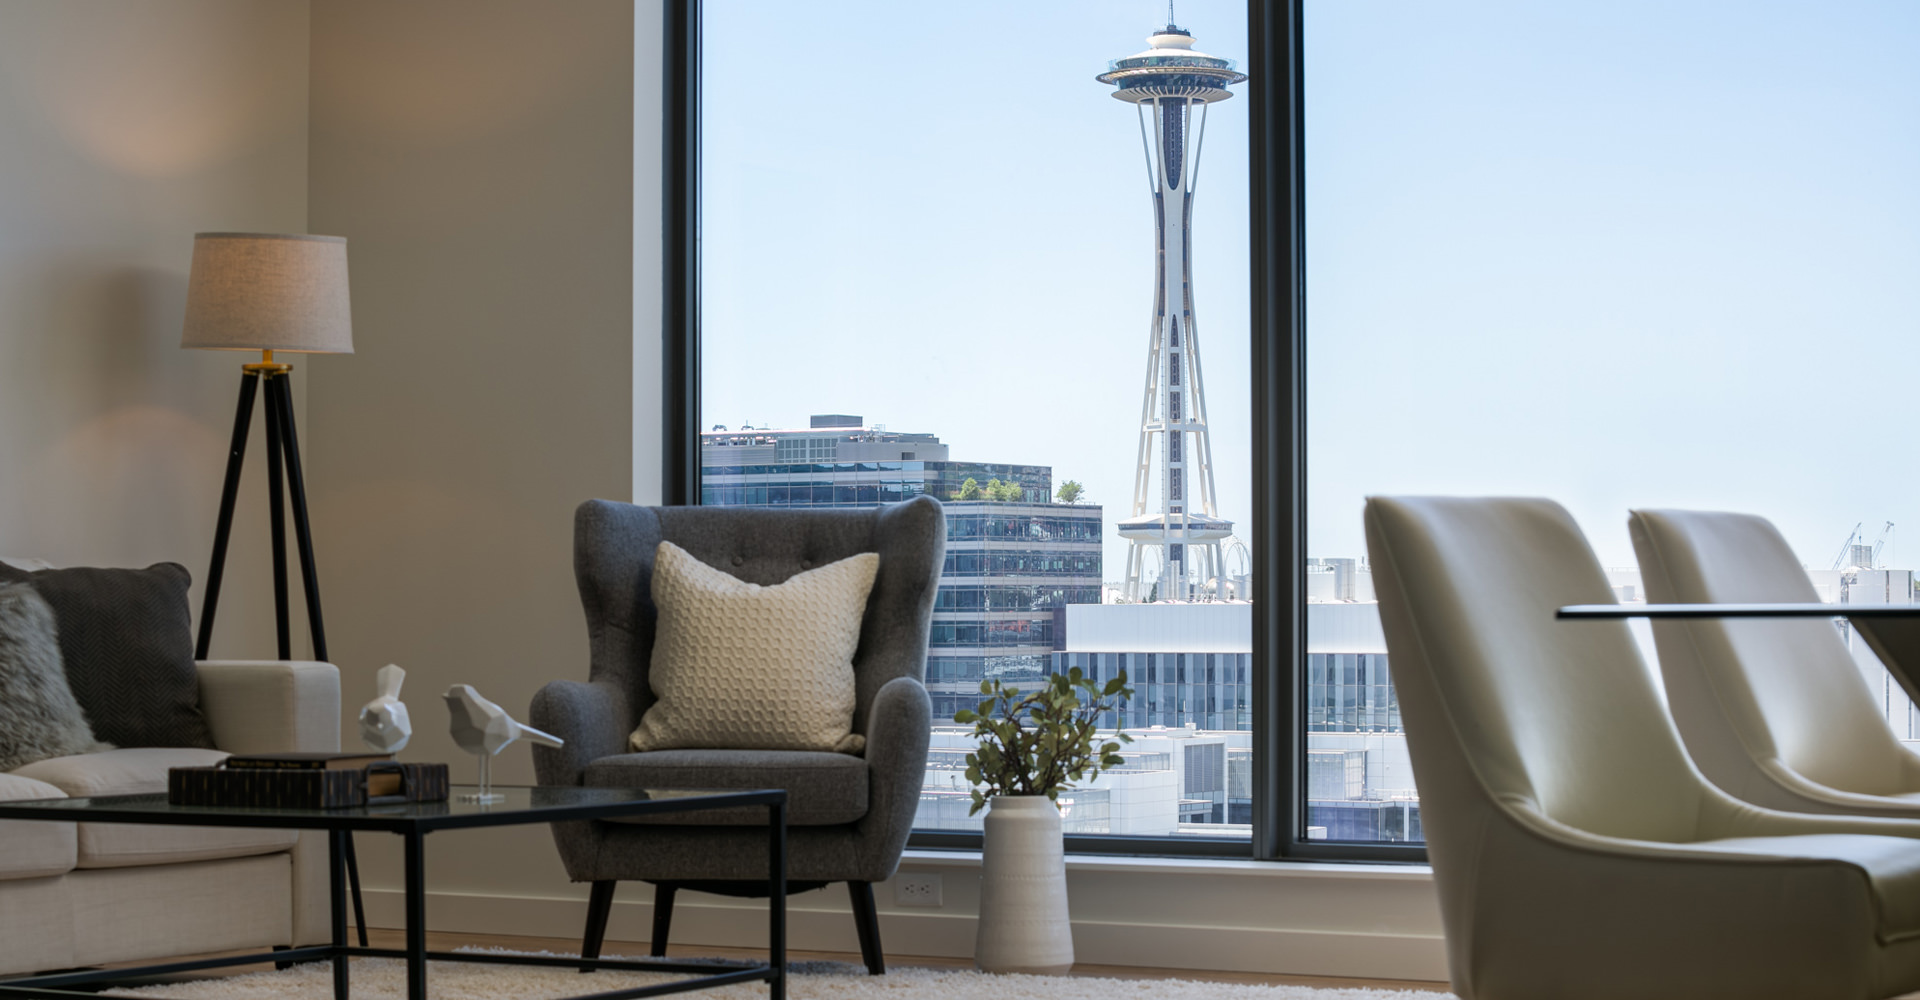 Attractive furnished living room with a view of the Space Needle